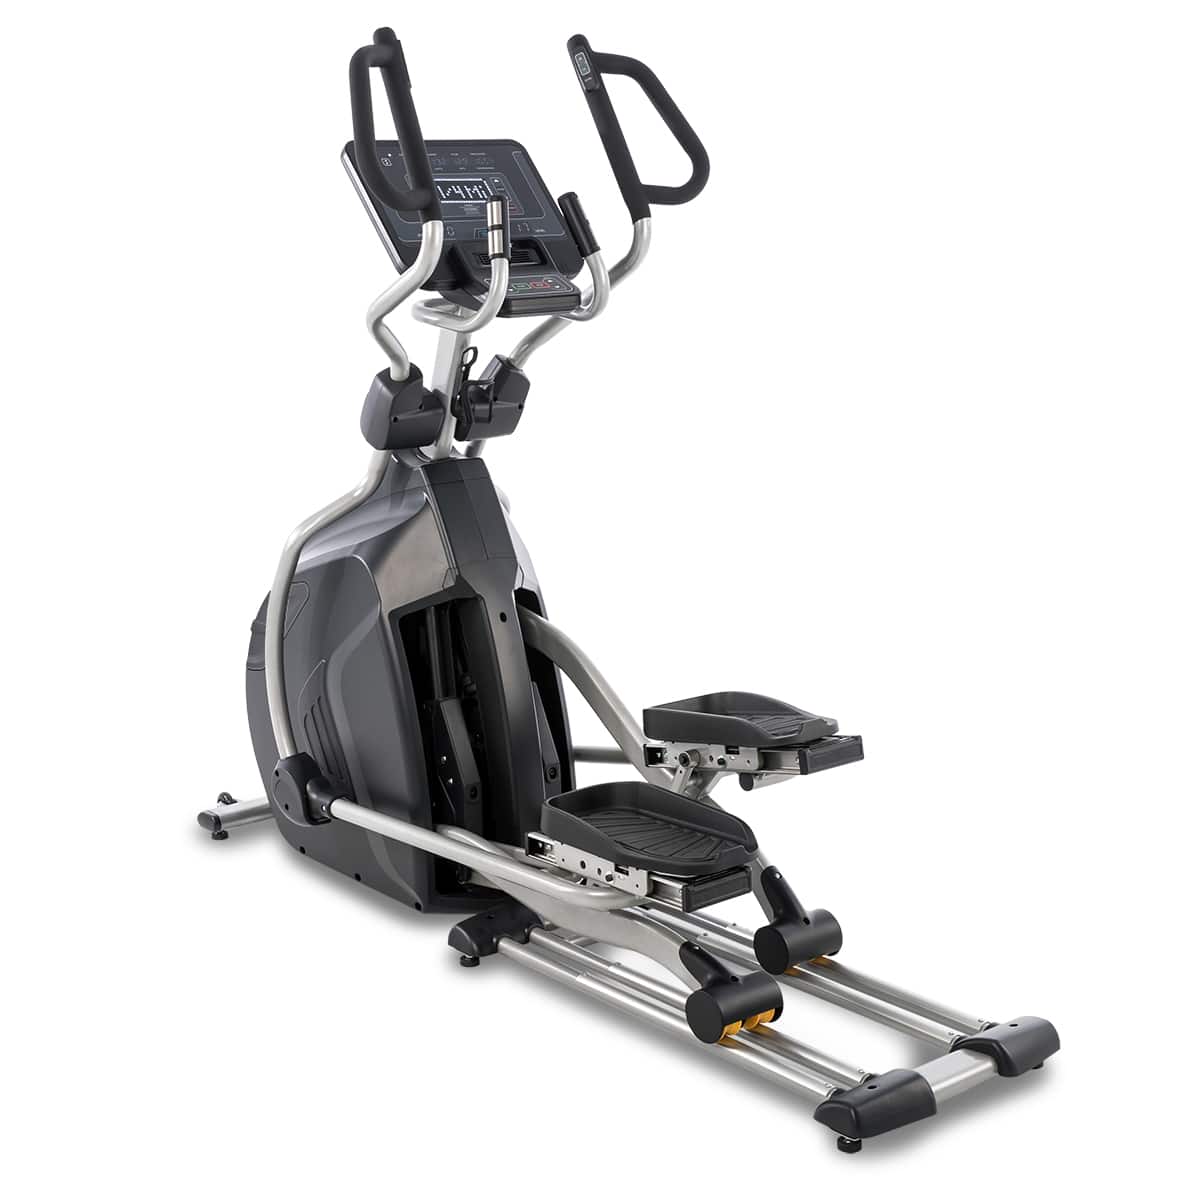 A stationary exercise bike with a seat and handlebars